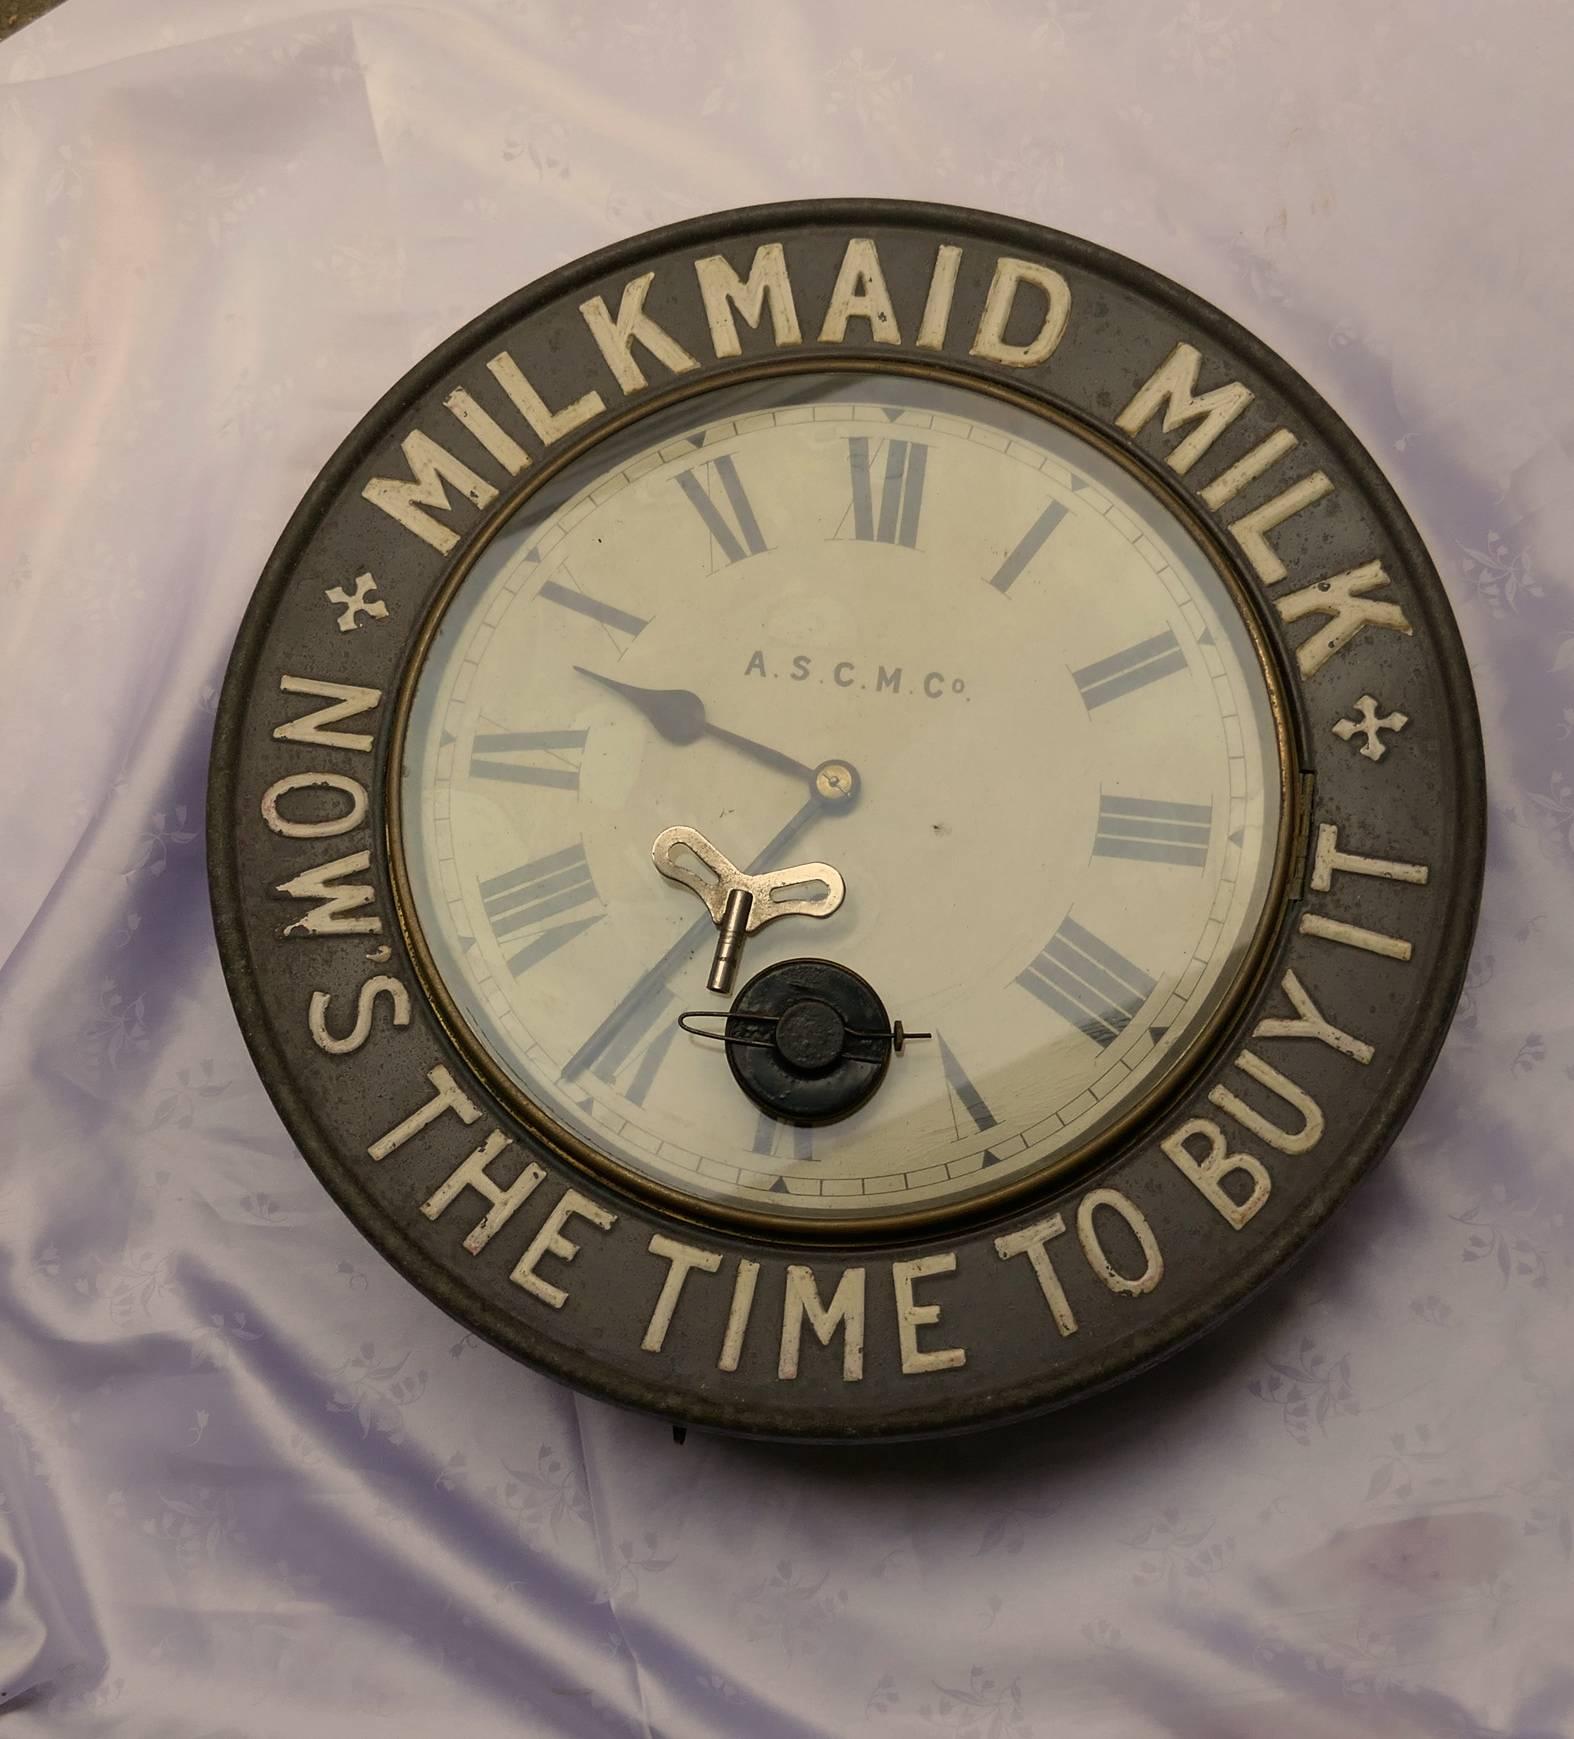 English Original Mikmaid Milk Advertising Clock, from 1890 by the A.S.C.M Co